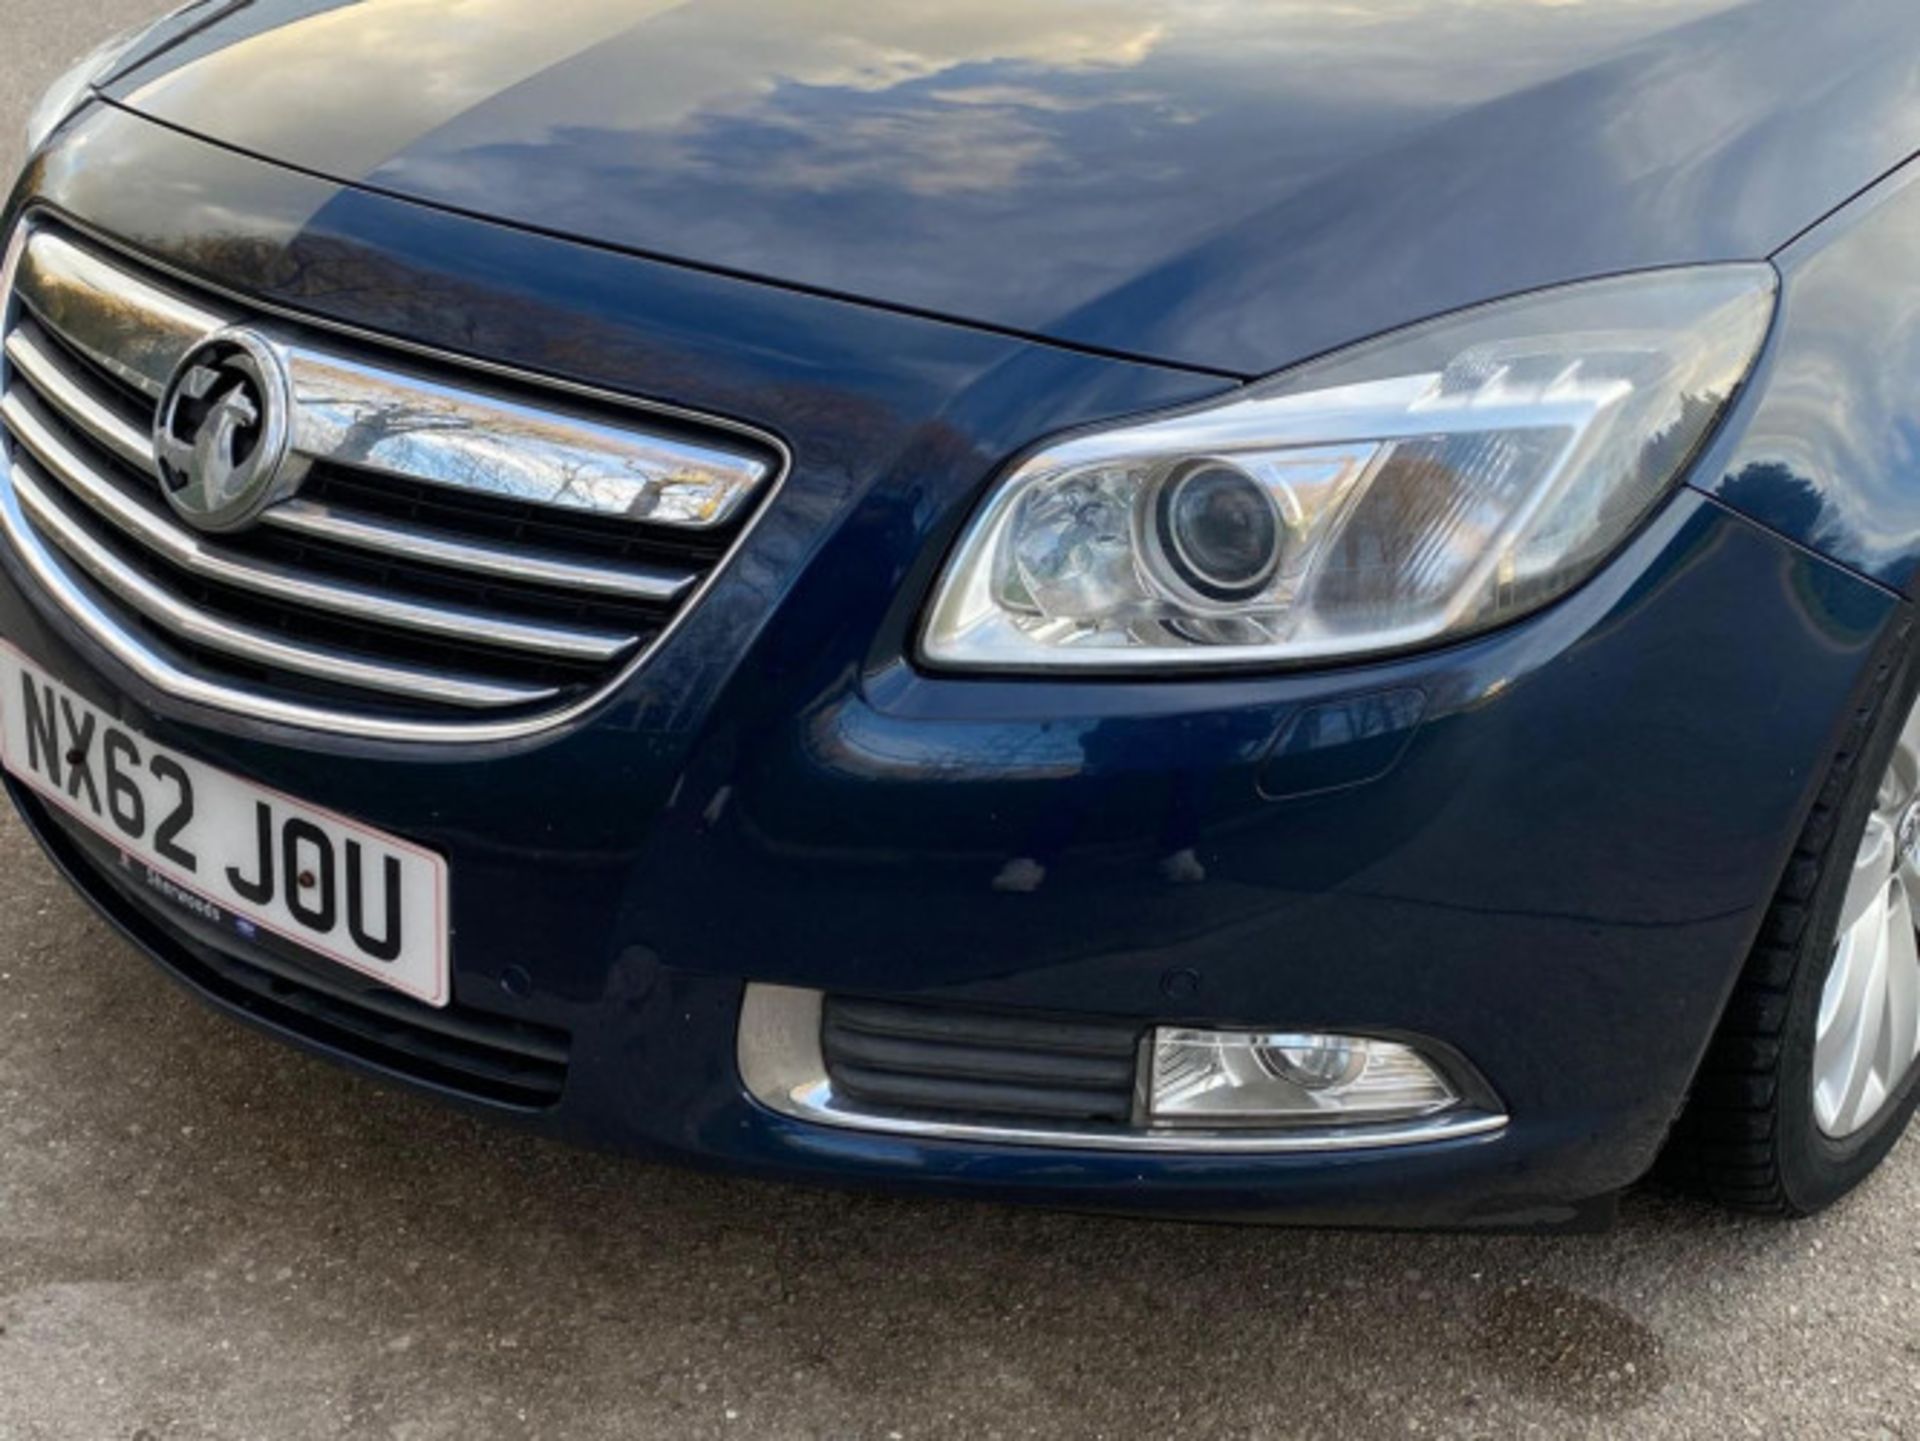 2012 VAUXHALL INSIGNIA 2.0 CDTI ELITE AUTO EURO 5 - DISCOVER EXCELLENCE >>--NO VAT ON HAMMER--<< - Image 71 of 79